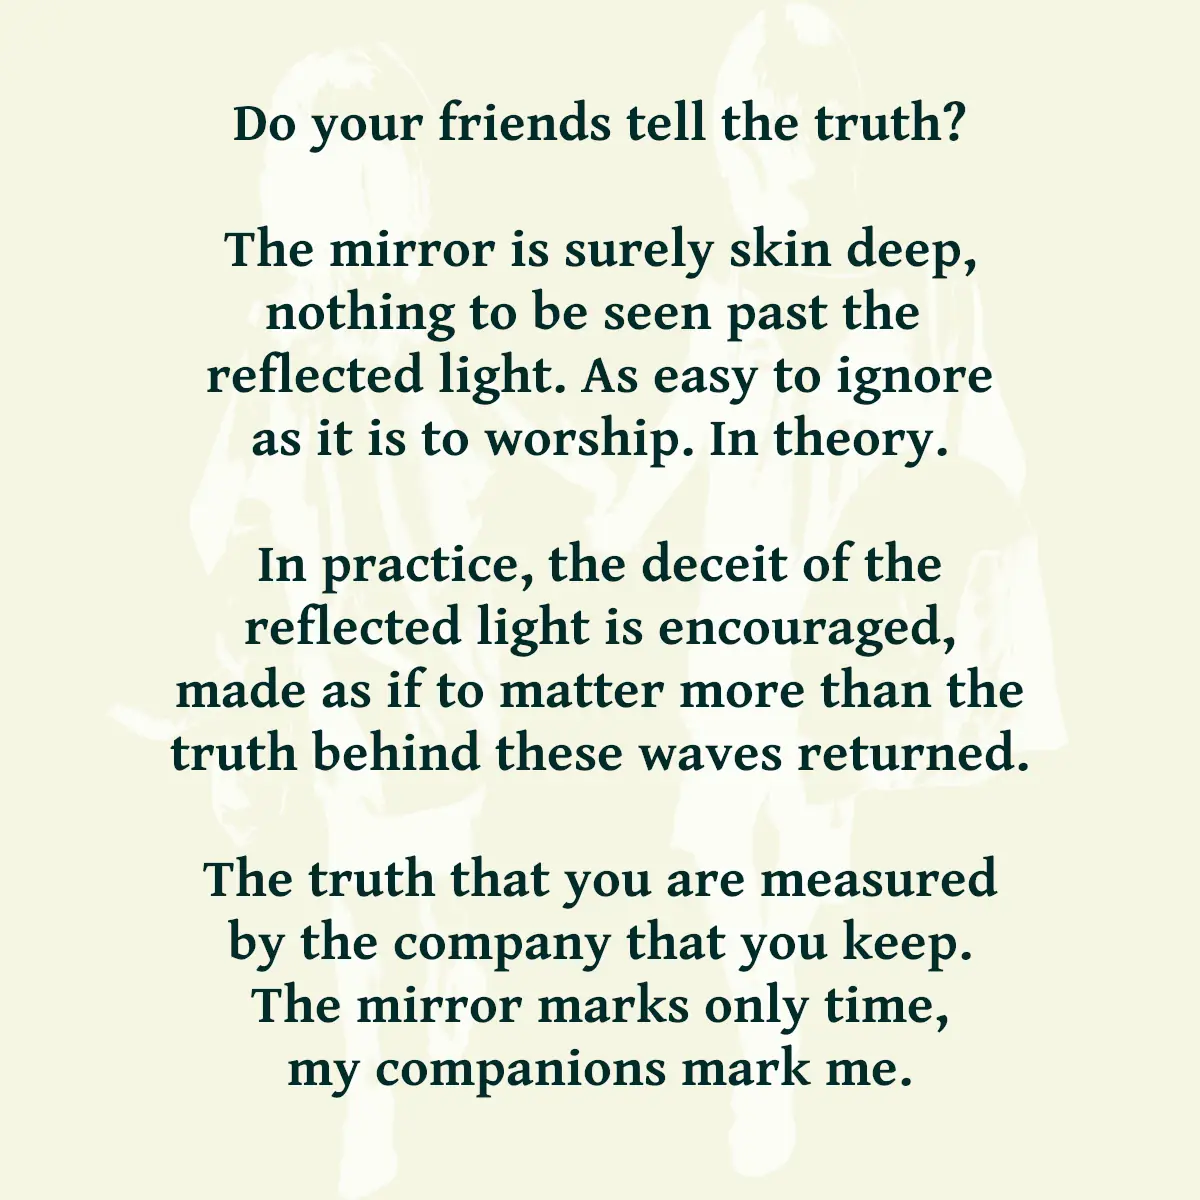 Do your friends tell the truth? The mirror is surely skin deep, nothing to be seen past the reflected light. As easy to ignore as it is to worship. In theory. In practice, the deceit of the reflected light is encouraged, made as if to matter more than the truth behind these waves returned. The truth that you are measured by the company that you keep. The mirror marks only time, my companions mark me.